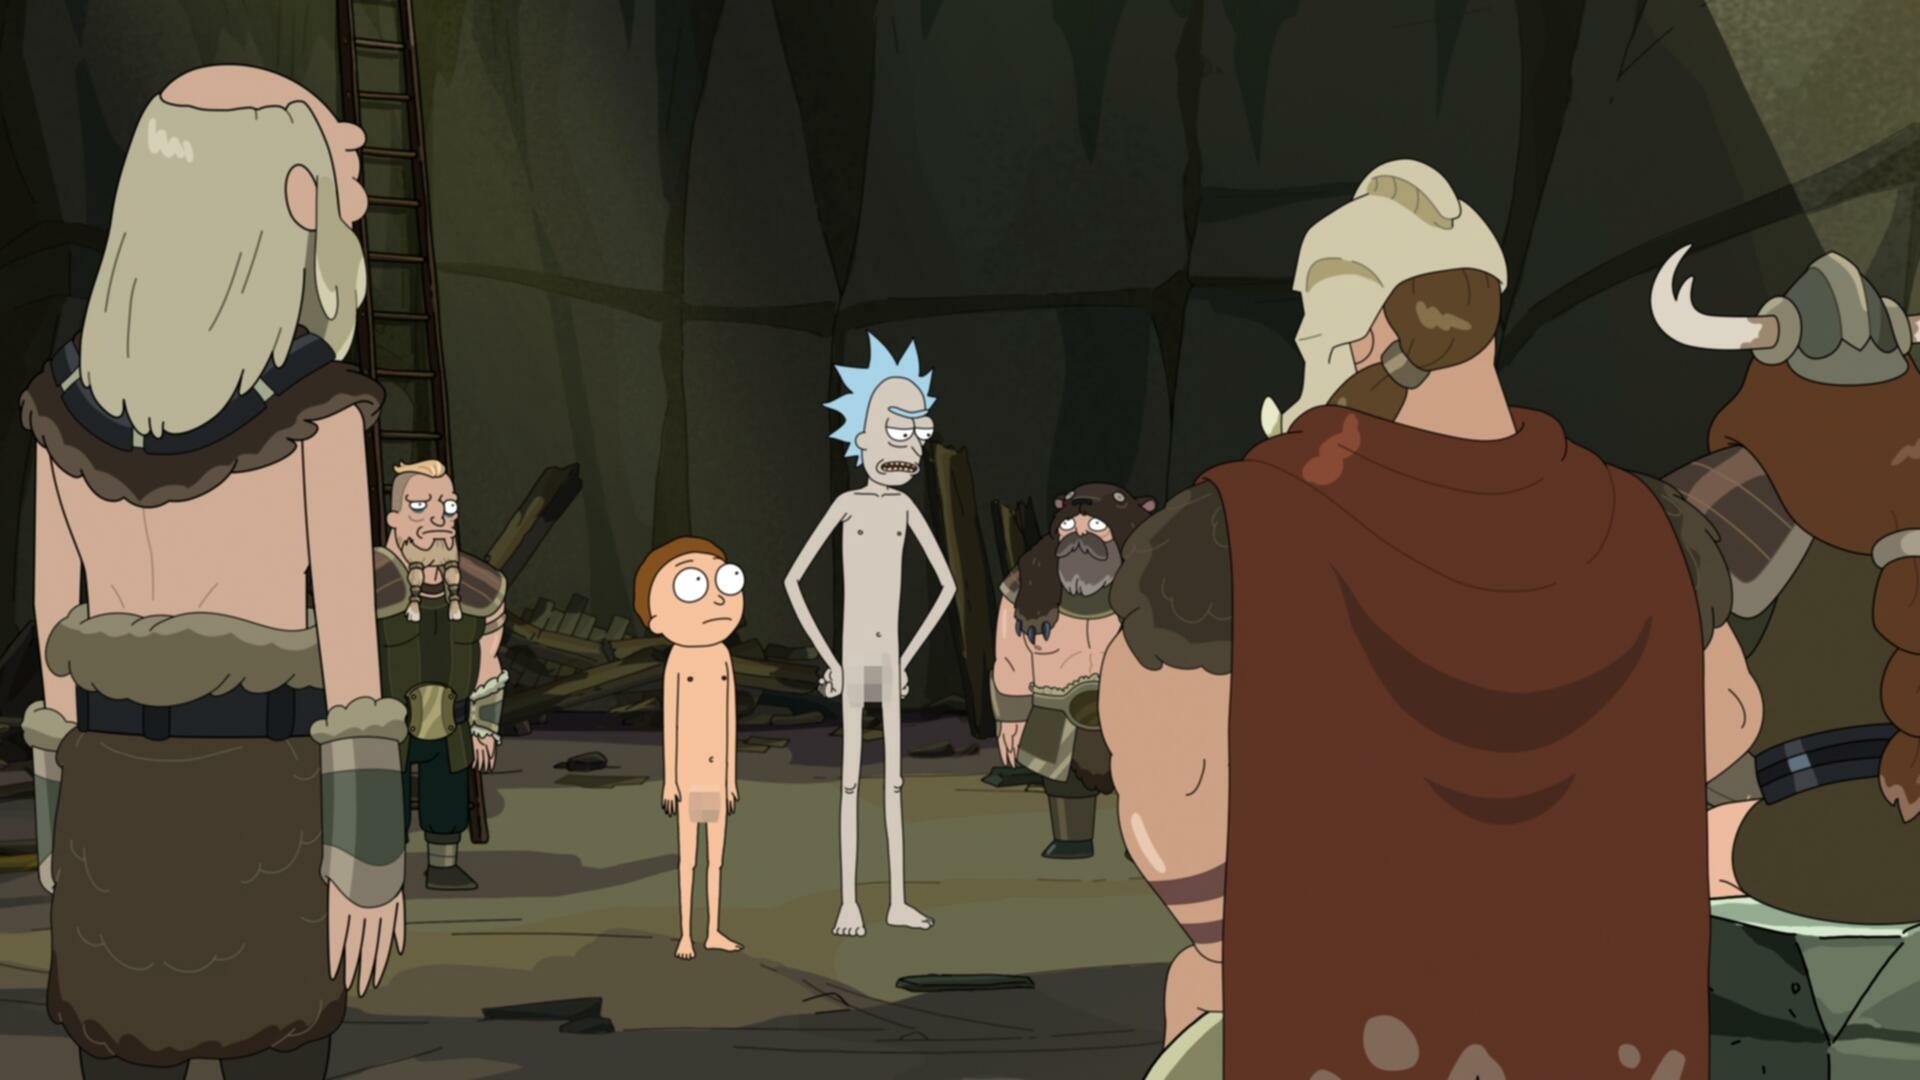 I finally get it. Previous Leon. PreviousLE on. I don't know why it took so  long but it finally clicked : r/rickandmorty